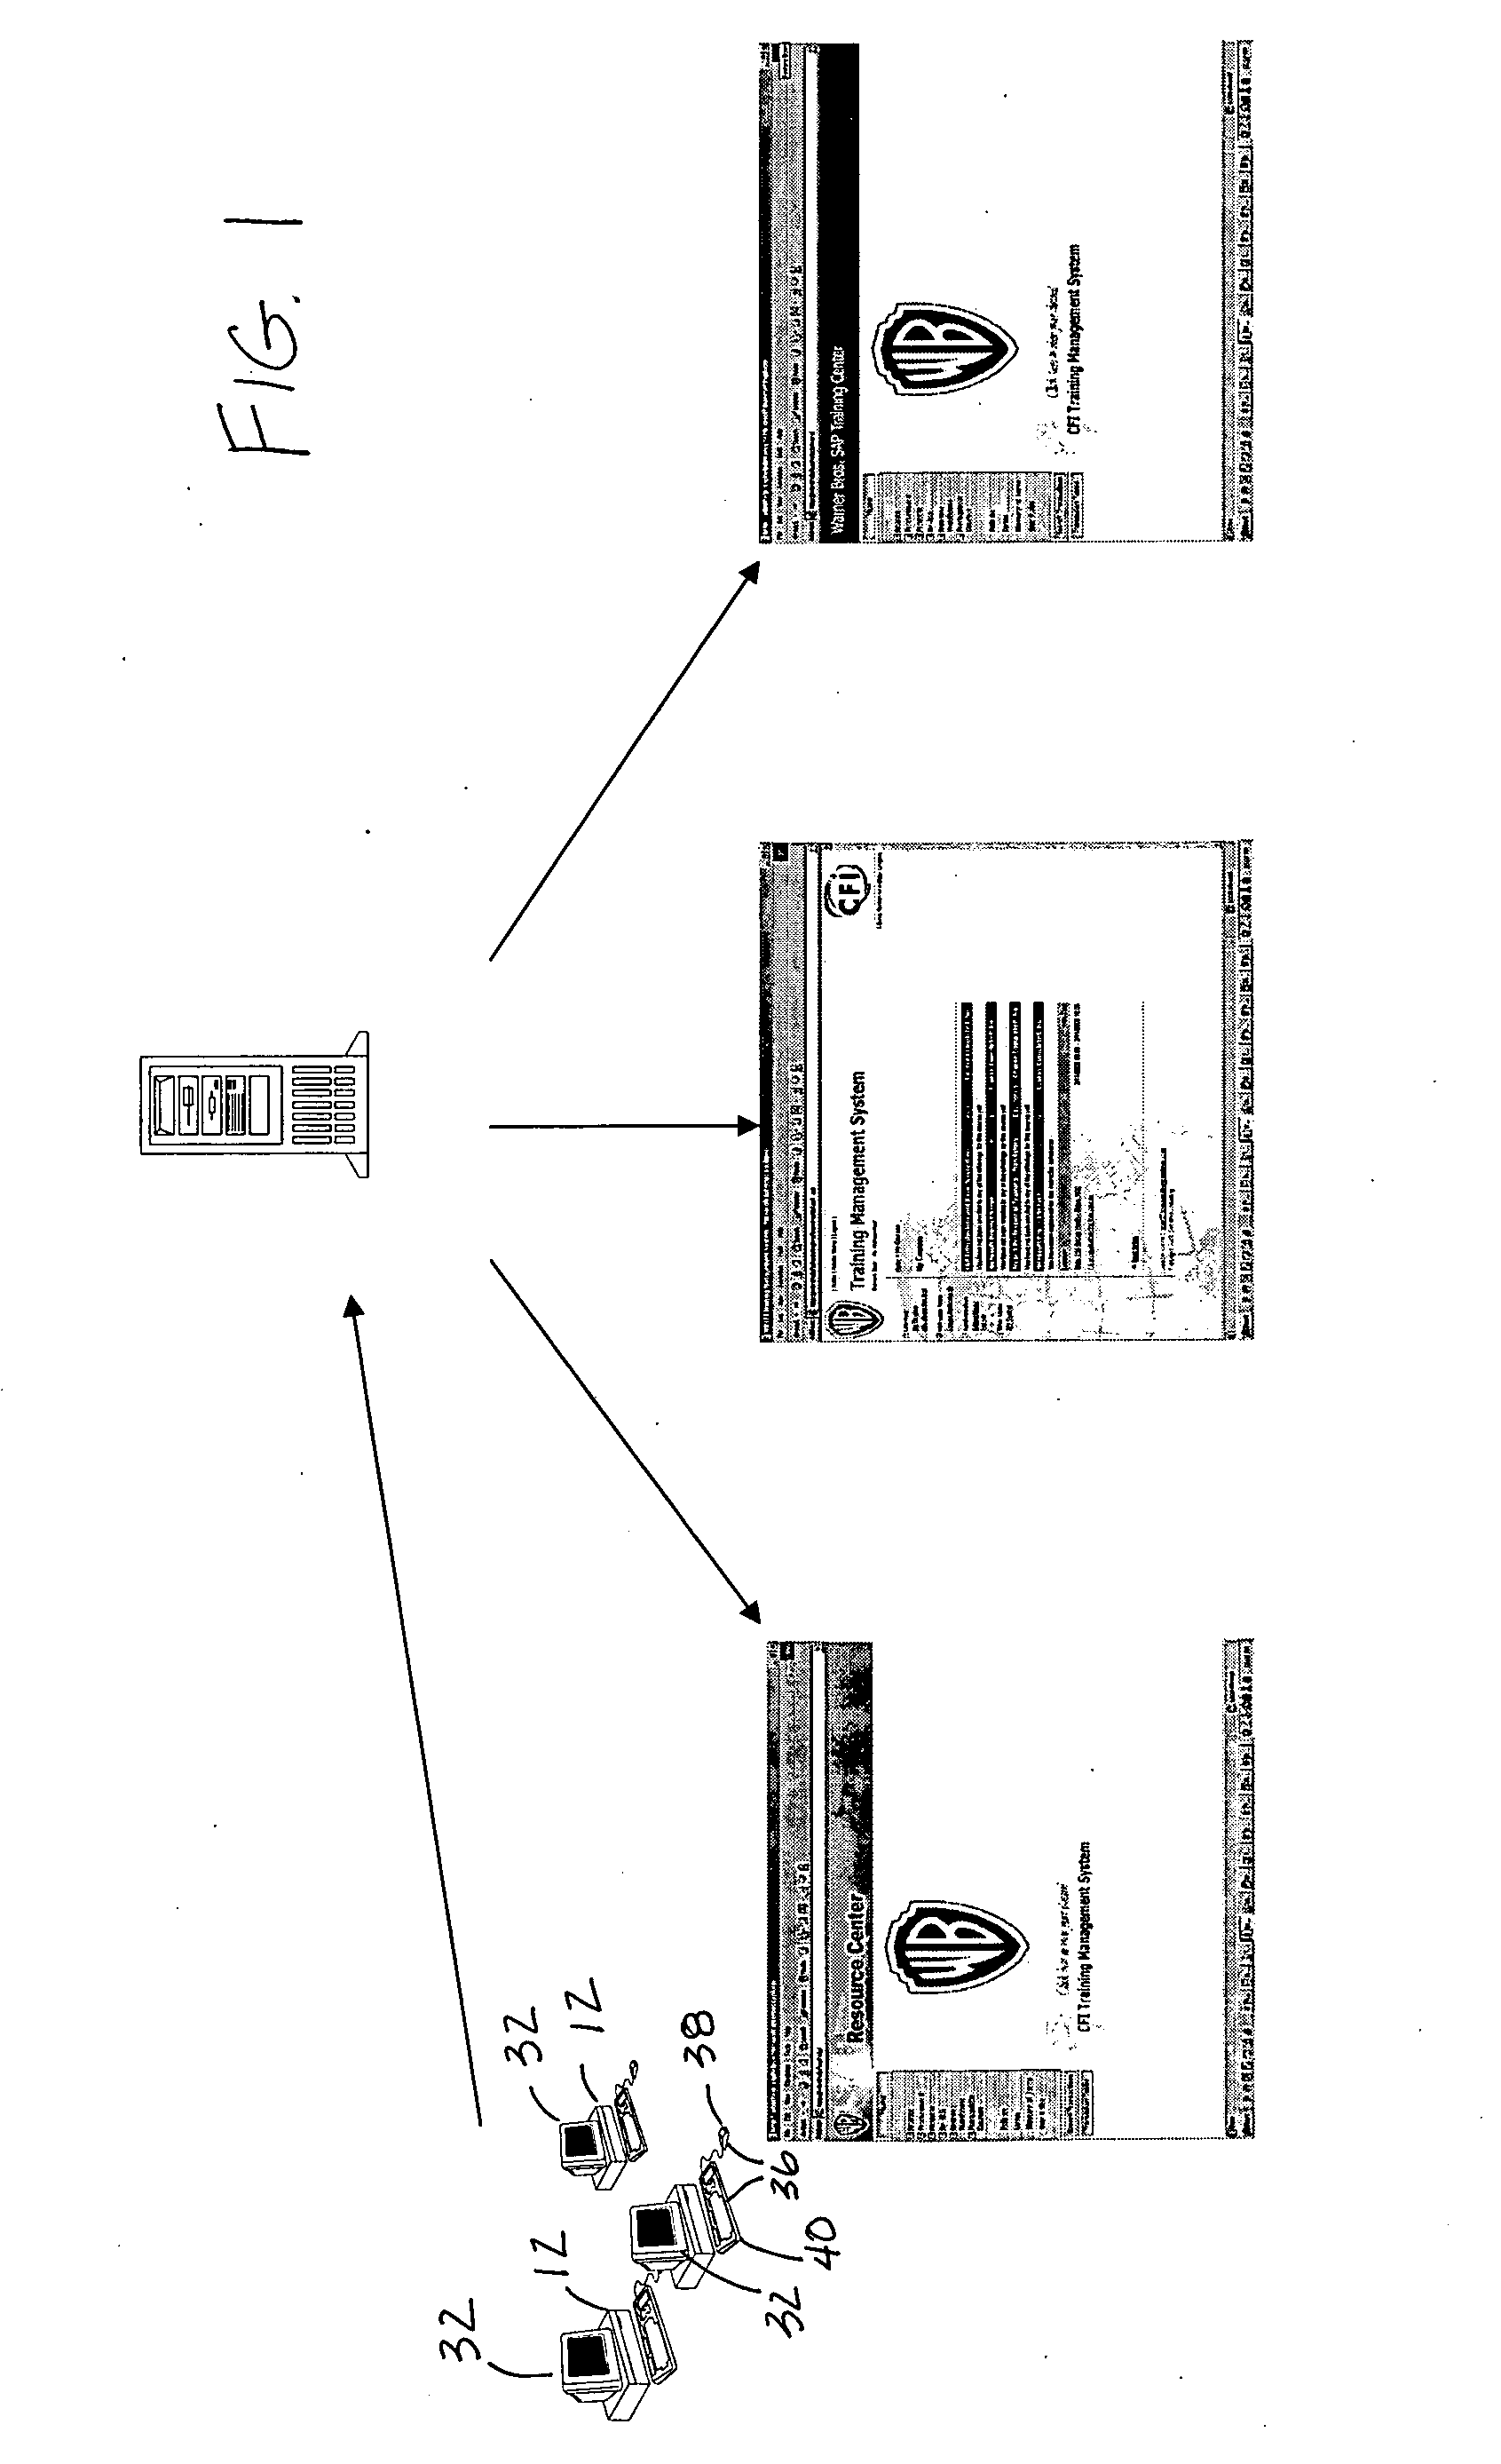 Database software program and related method for using it